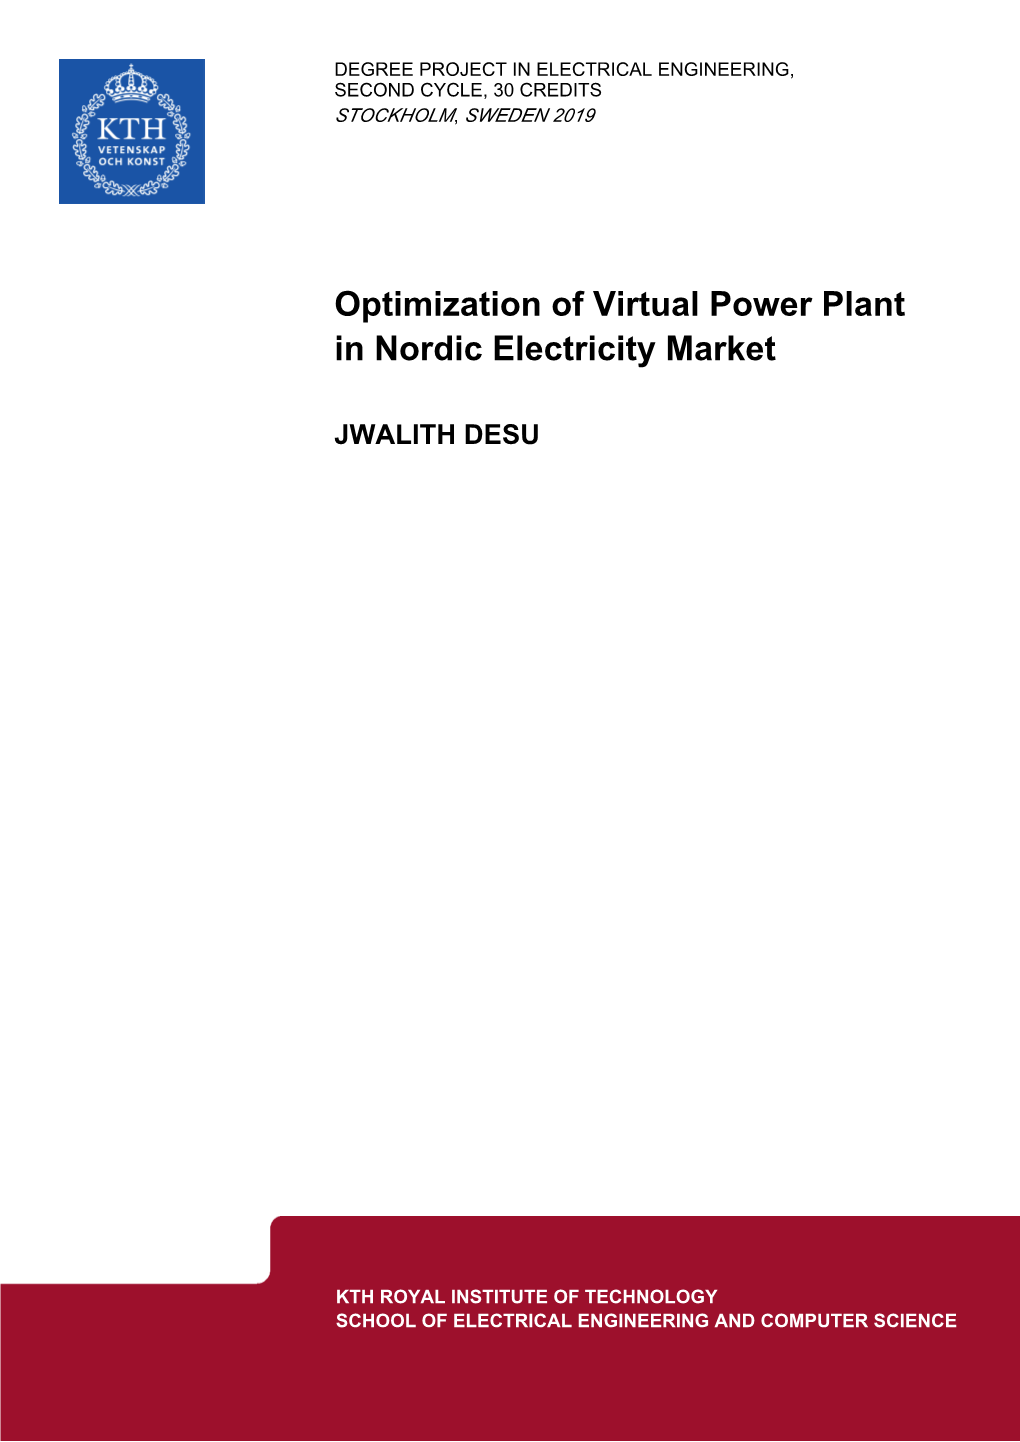 Optimization of Virtual Power Plant in Nordic Electricity Market